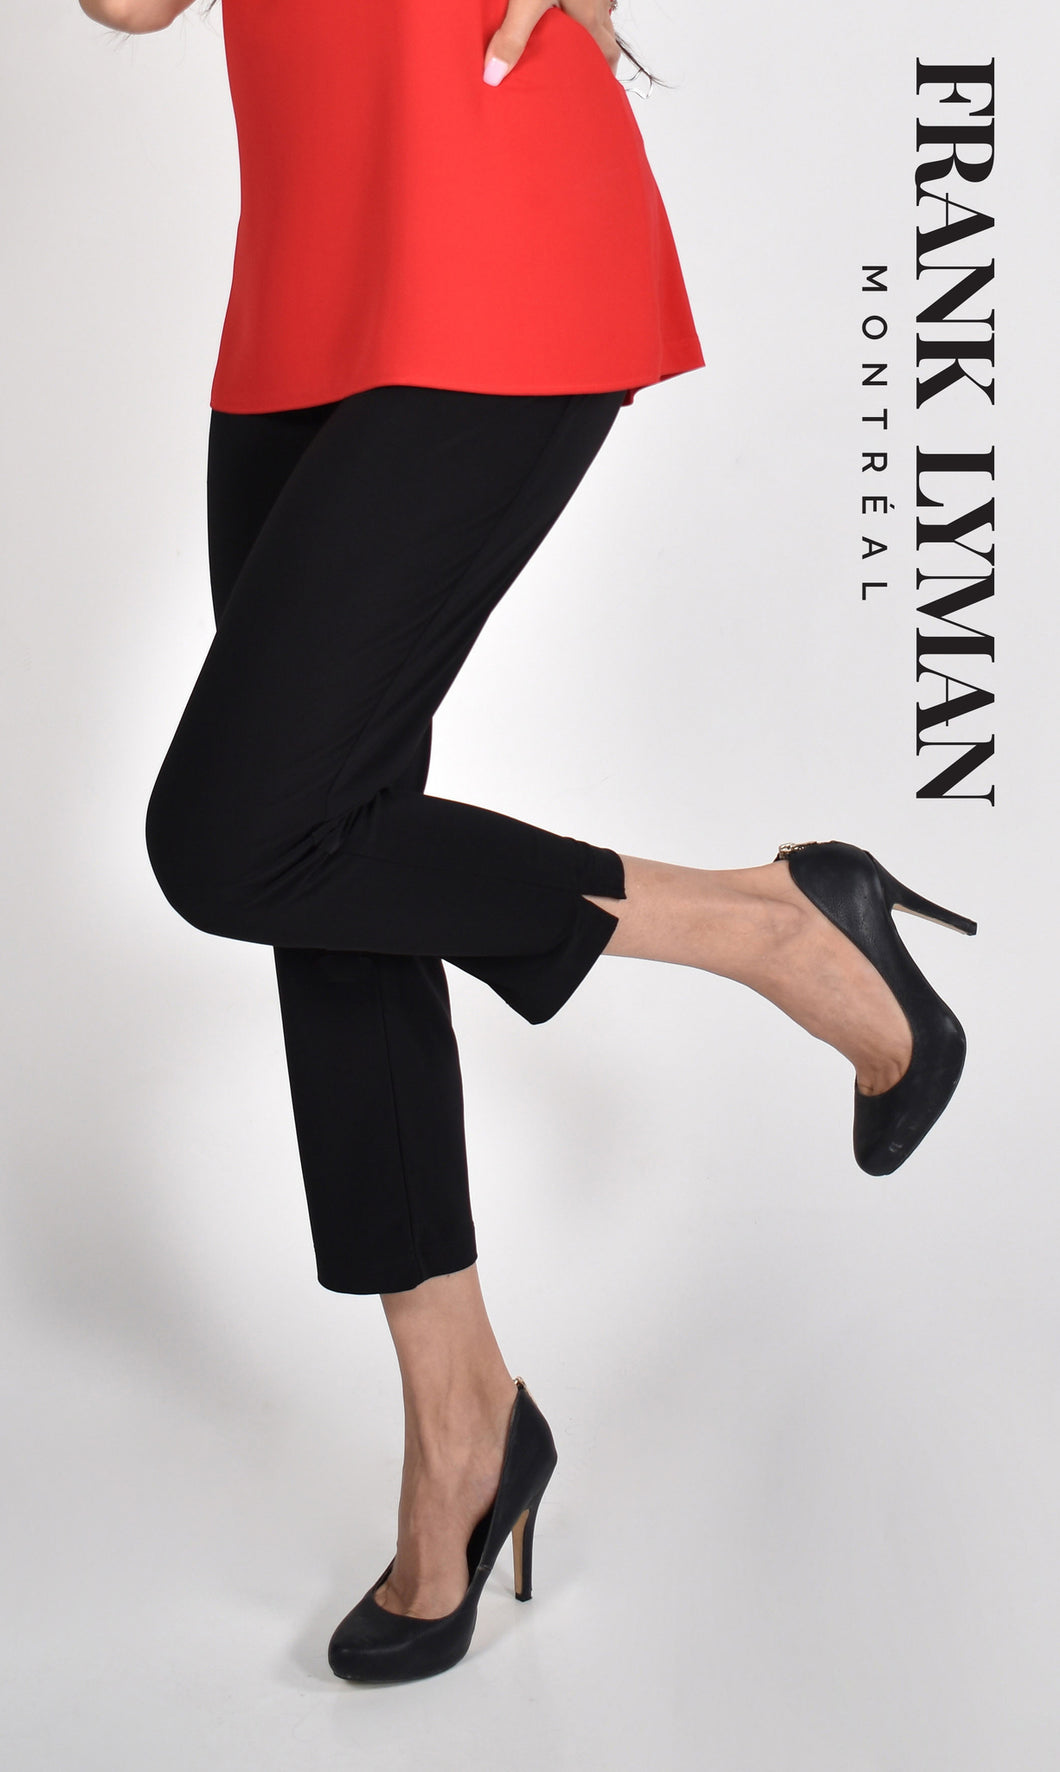 Our Frank Lyman Sophie capris are the perfect addition to any wardrobe.  An oh-so-soft knit creates a comfortable capri while the side slits create an edge.  A classic black capri, it effortlessly goes with almost everything in your closet.